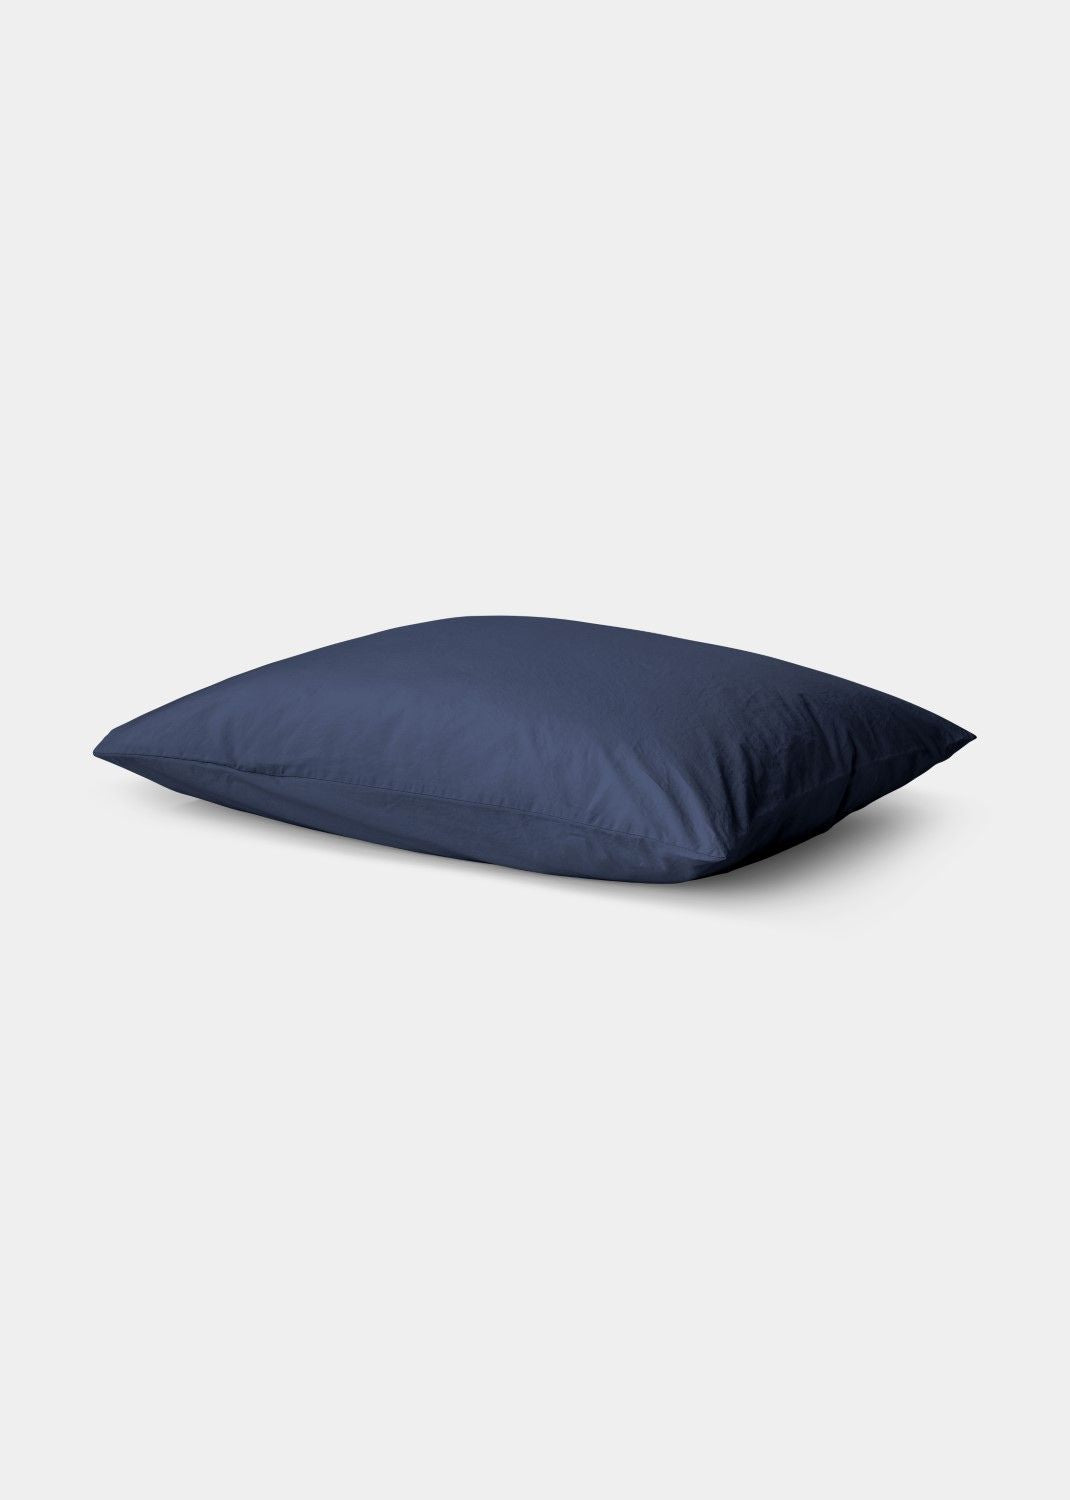 Sekan Studio Cotton Percale Pillow Covers - Marine Blue